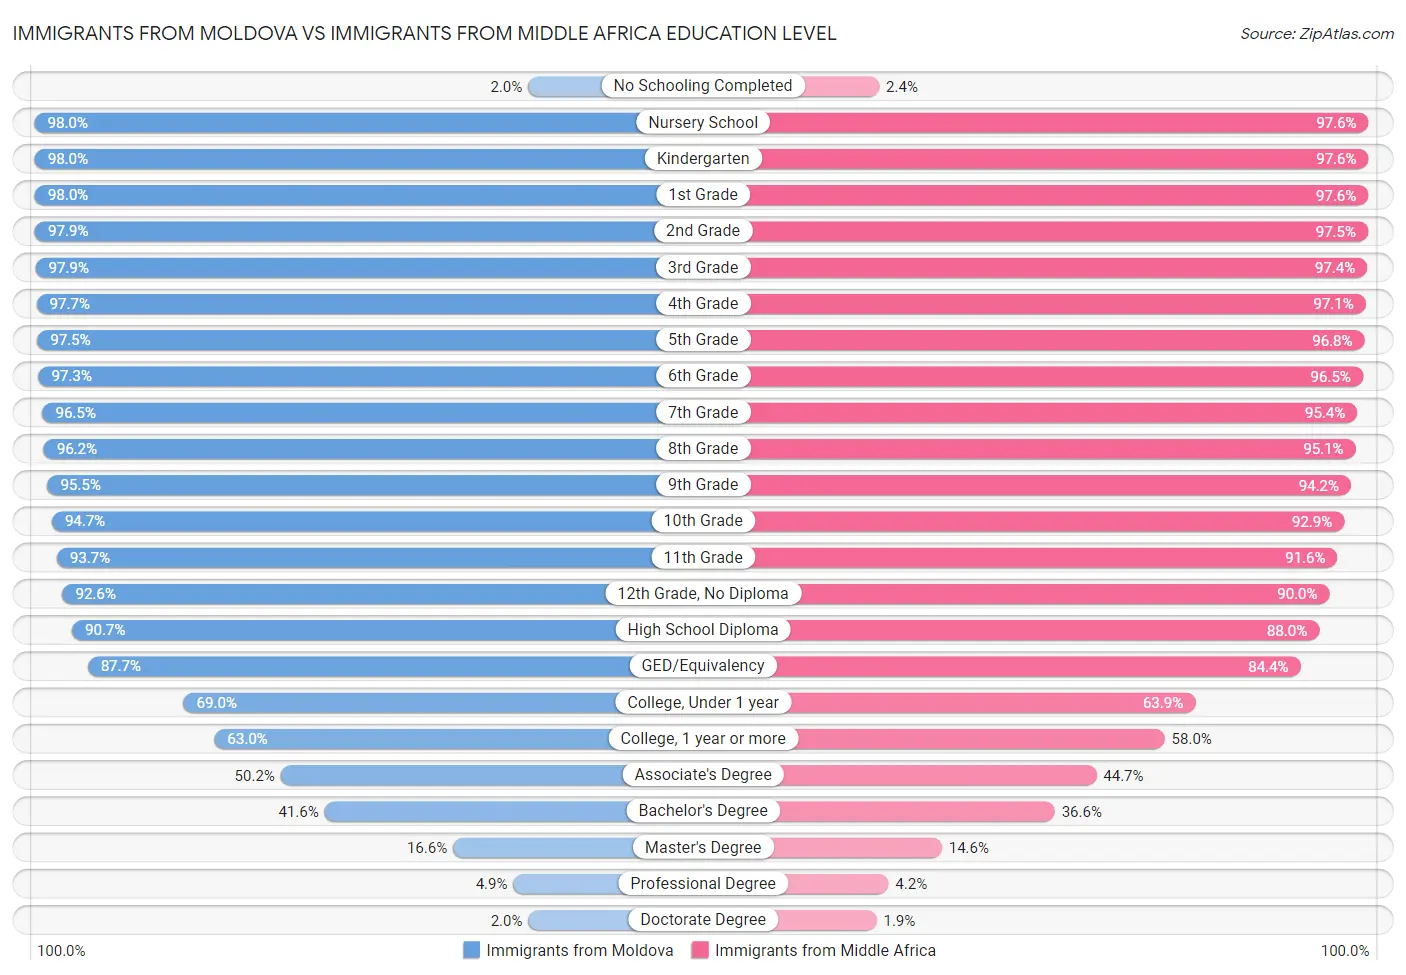 Immigrants from Moldova vs Immigrants from Middle Africa Education Level